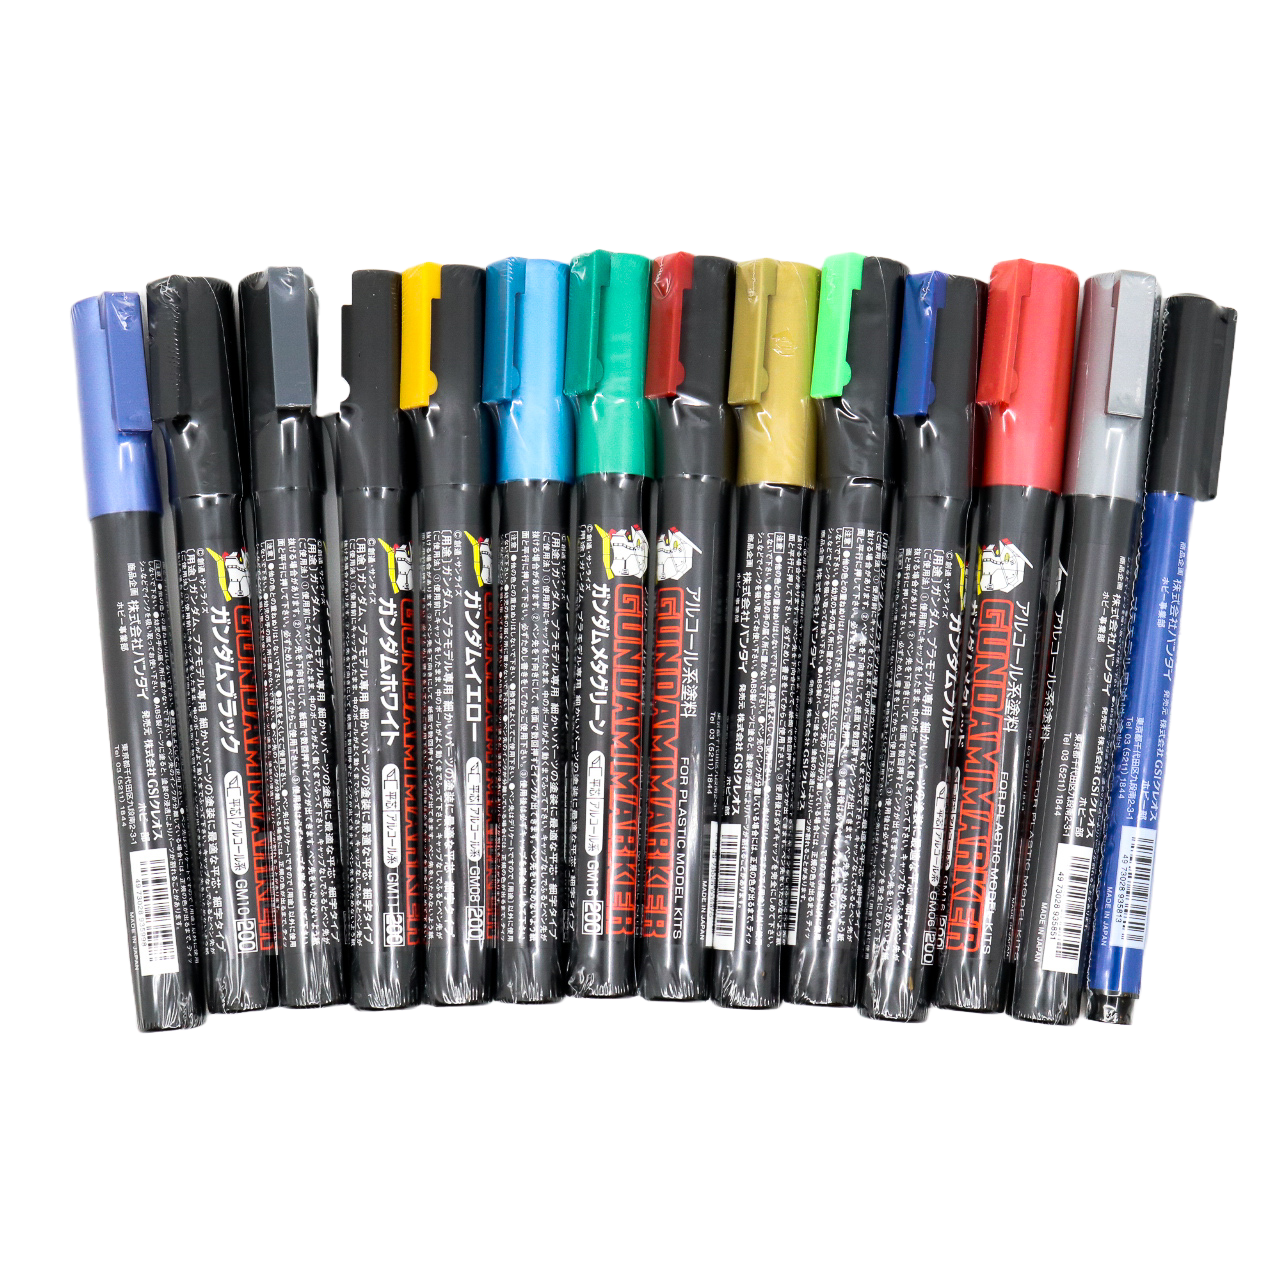 Livewire Games - Gundam Marker Sets & Individual Pens now shipping.  Including the latest Pen set from Iron-Blooded Orphans!